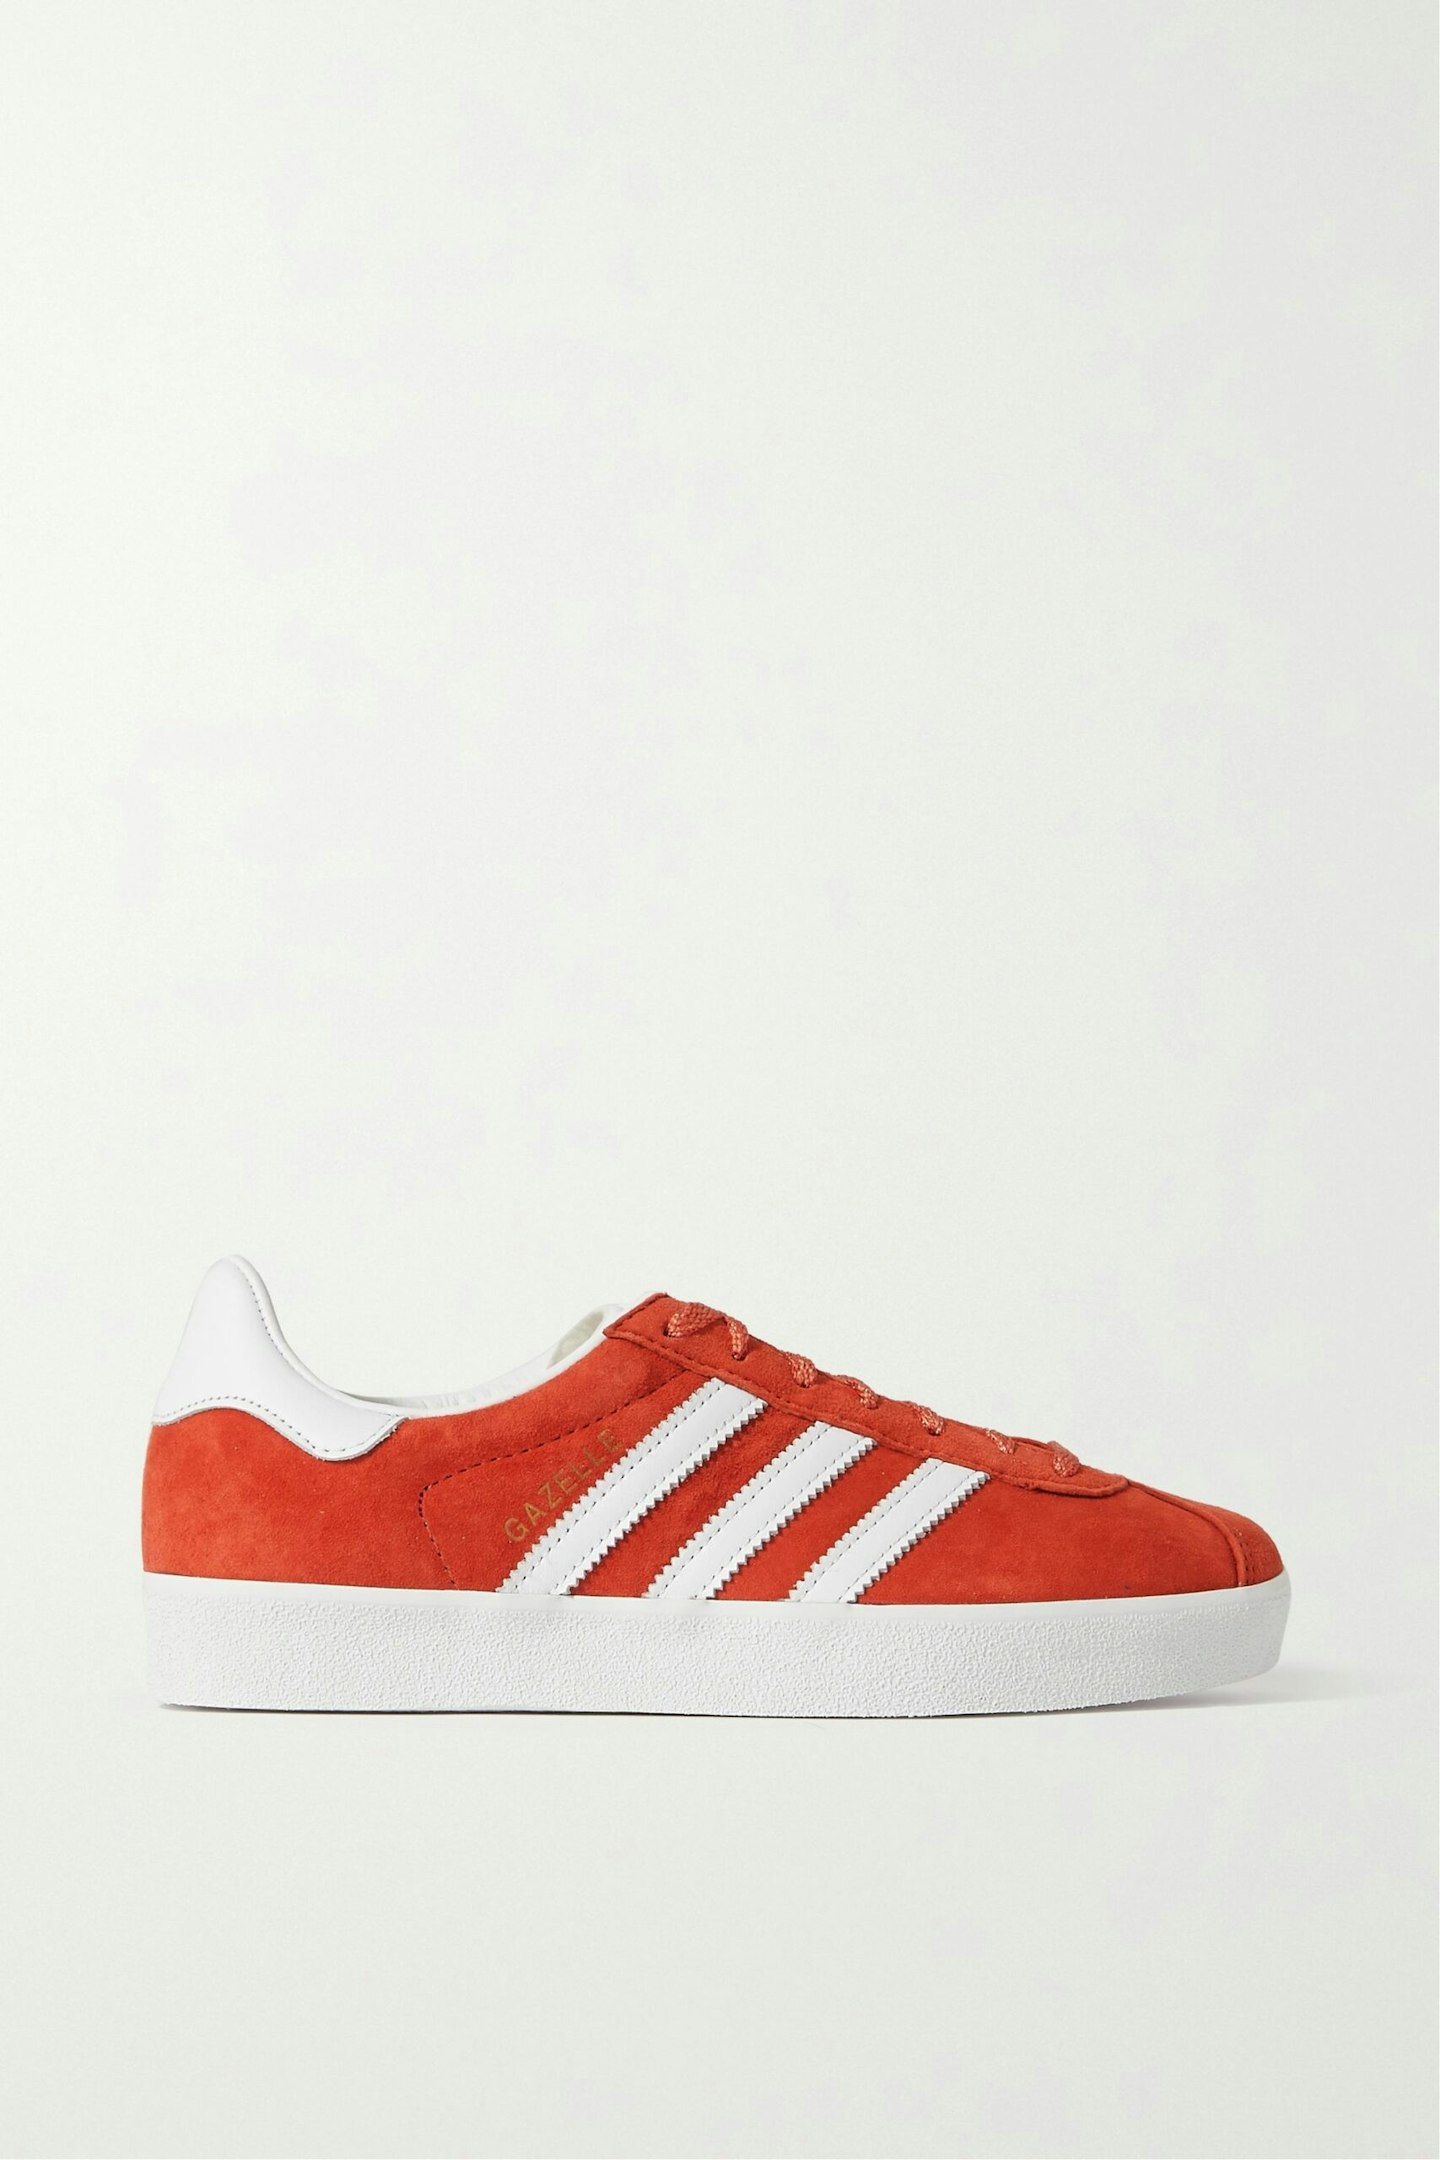 Adidas Original, Gazelle 85 Leather-Trimmed Suede Sneakers